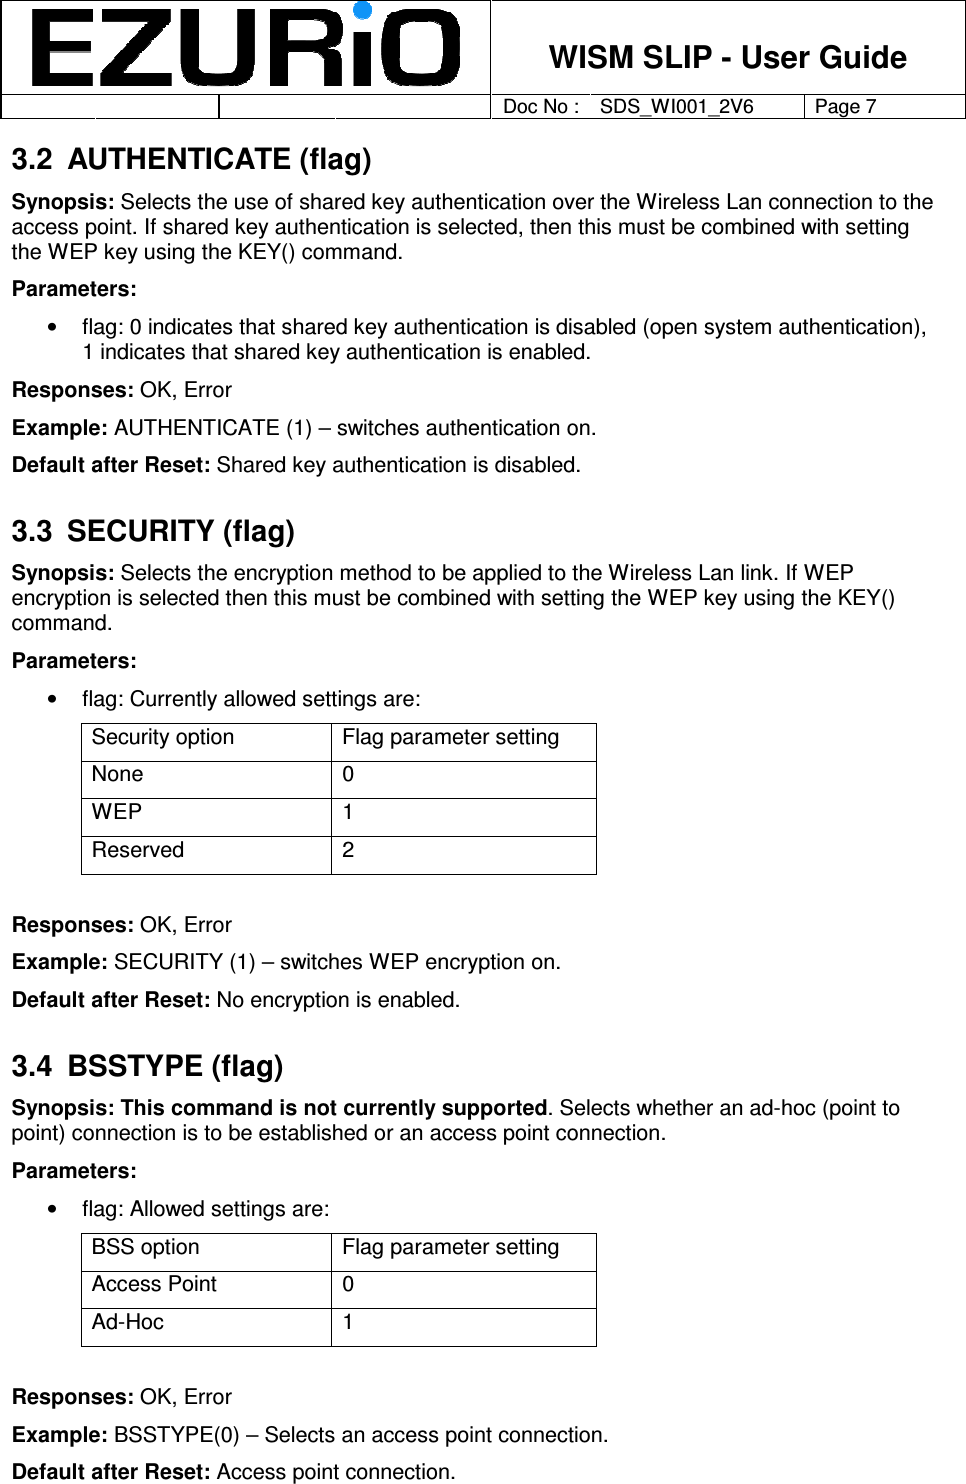    WISM SLIP - User Guide         Doc No : SDS_WI001_2V6 Page 7     3.2  AUTHENTICATE (flag) Synopsis: Selects the use of shared key authentication over the Wireless Lan connection to the access point. If shared key authentication is selected, then this must be combined with setting the WEP key using the KEY() command.  Parameters: •  flag: 0 indicates that shared key authentication is disabled (open system authentication), 1 indicates that shared key authentication is enabled. Responses: OK, Error Example: AUTHENTICATE (1) – switches authentication on.  Default after Reset: Shared key authentication is disabled.  3.3  SECURITY (flag) Synopsis: Selects the encryption method to be applied to the Wireless Lan link. If WEP encryption is selected then this must be combined with setting the WEP key using the KEY() command.  Parameters: •  flag: Currently allowed settings are: Security option  Flag parameter setting None  0 WEP  1 Reserved  2  Responses: OK, Error Example: SECURITY (1) – switches WEP encryption on. Default after Reset: No encryption is enabled.  3.4  BSSTYPE (flag) Synopsis: This command is not currently supported. Selects whether an ad-hoc (point to point) connection is to be established or an access point connection.  Parameters:  •  flag: Allowed settings are: BSS option  Flag parameter setting Access Point  0 Ad-Hoc  1  Responses: OK, Error Example: BSSTYPE(0) – Selects an access point connection. Default after Reset: Access point connection. 